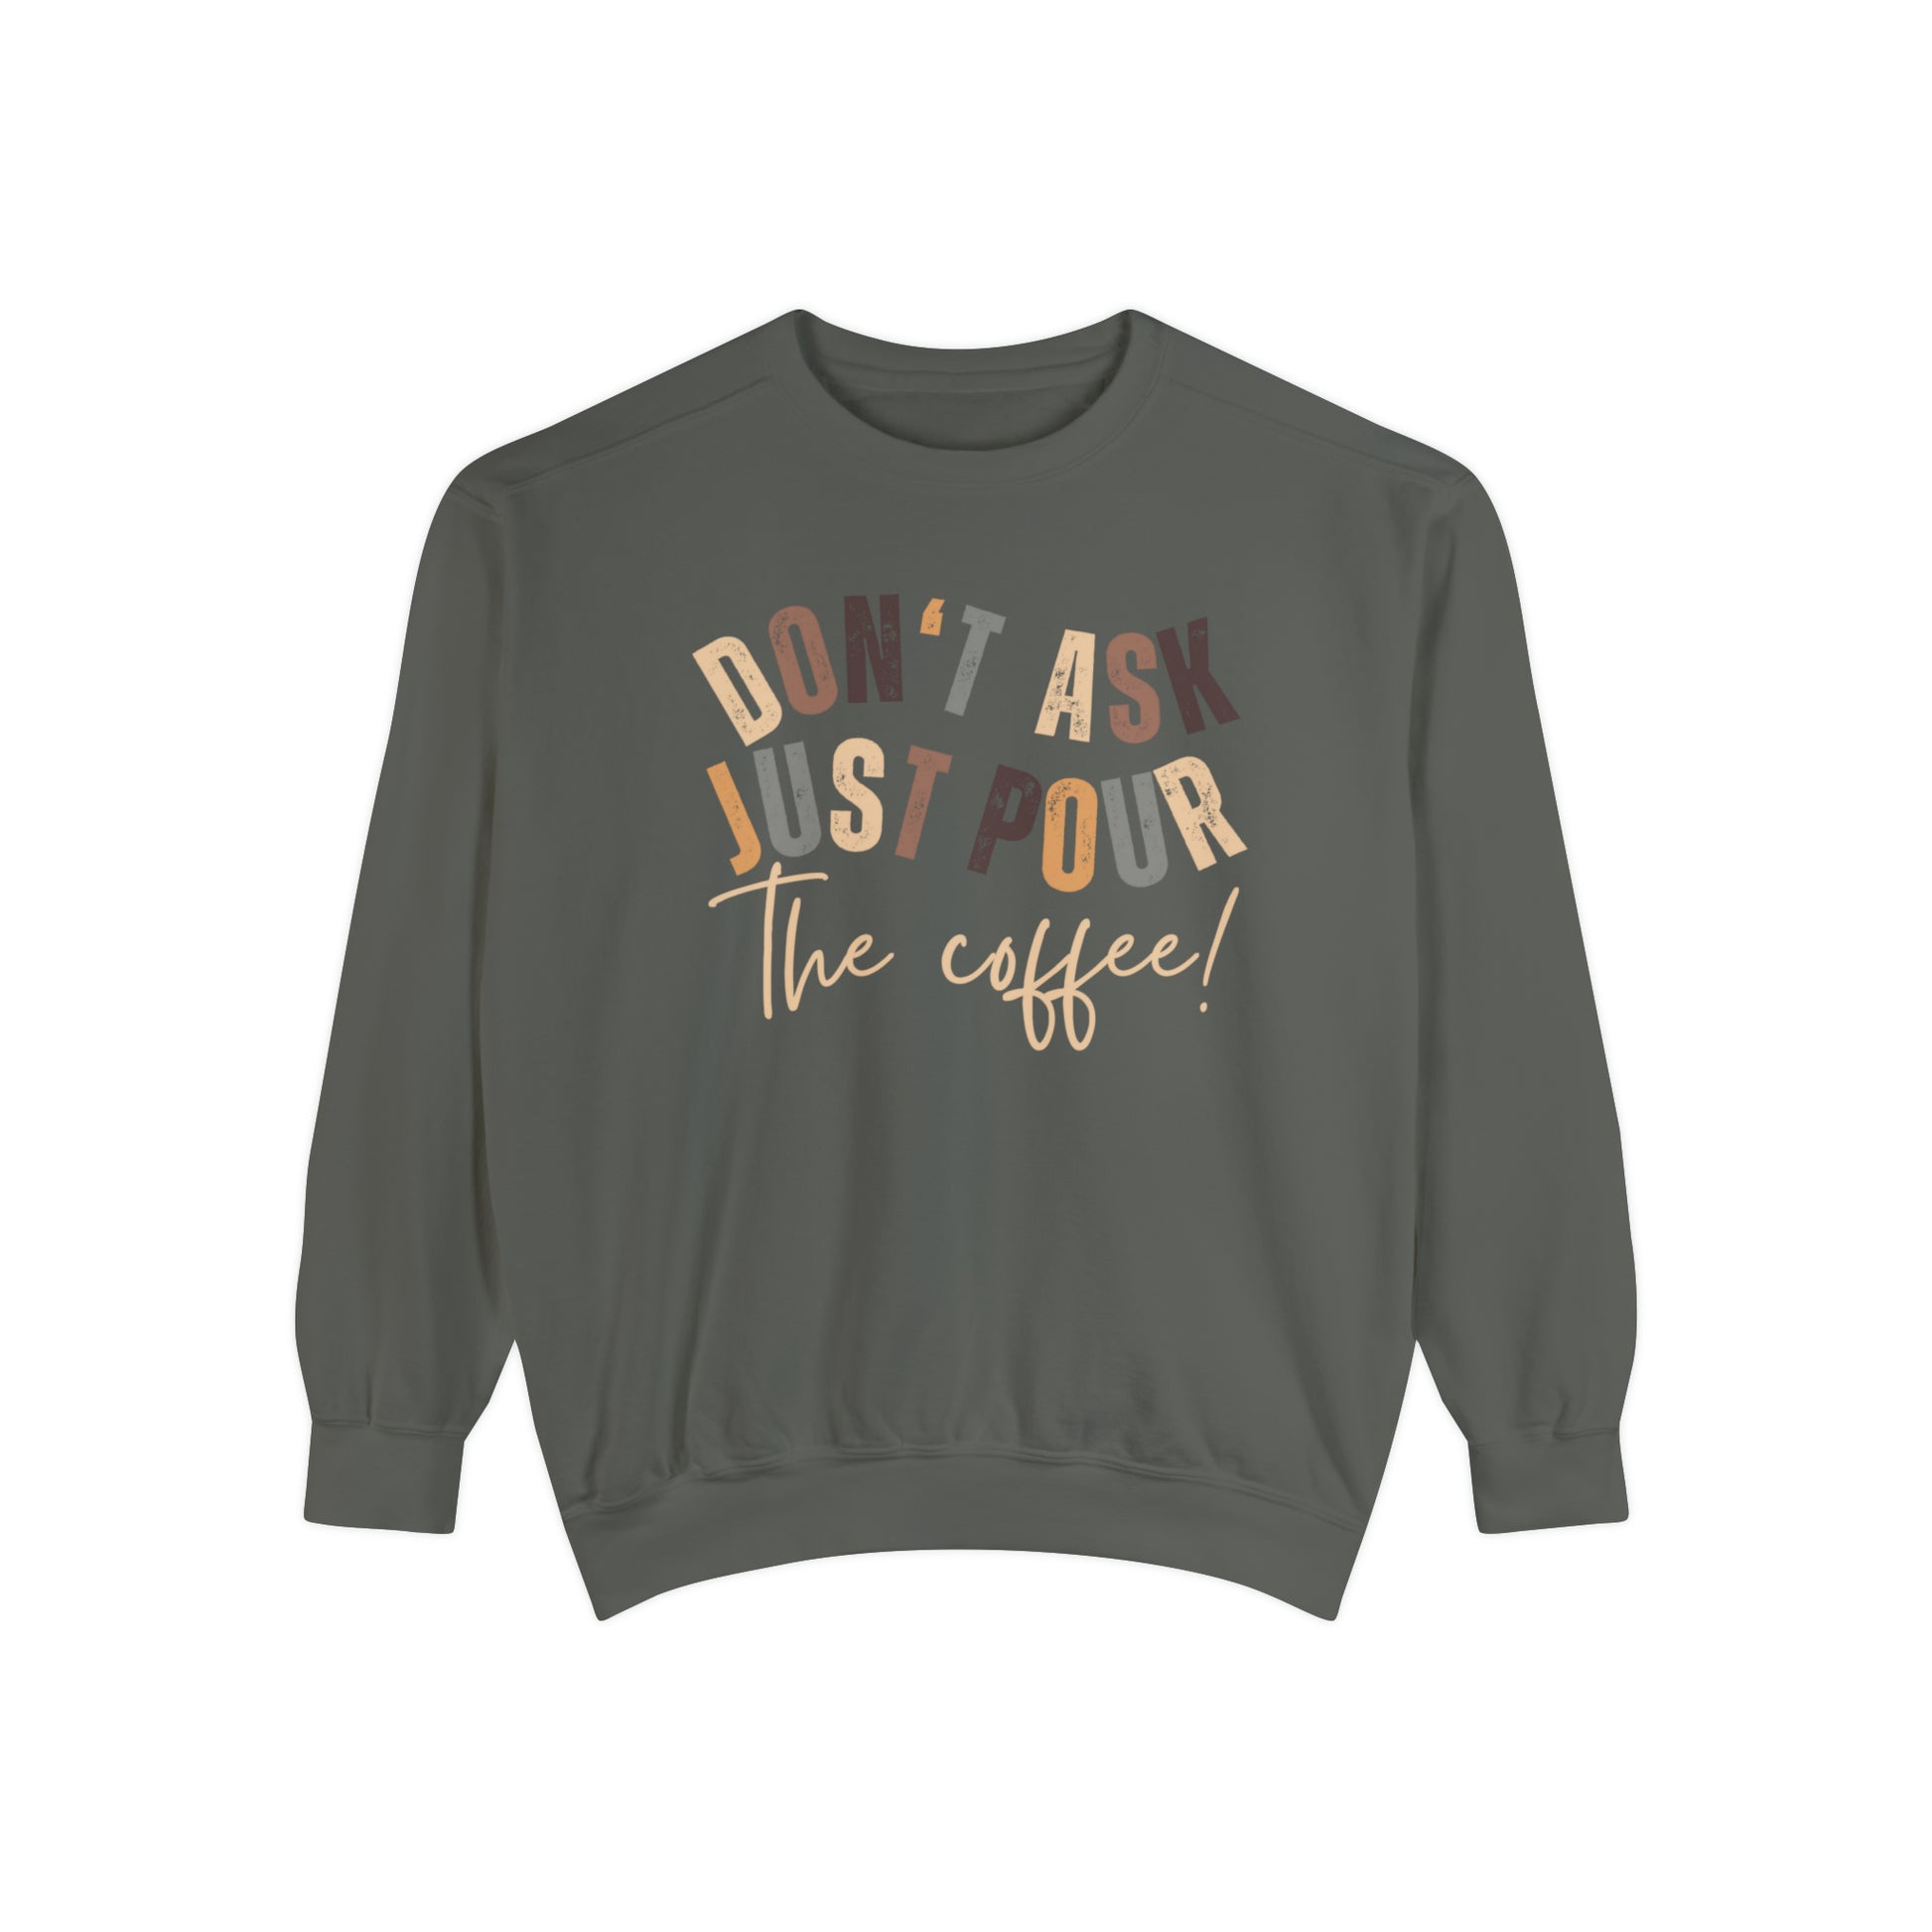 "Cozy Comfort Colors Women's Sweatshirt - 'Don't Ask Just Pour The Coffee!' | Humorous and Trendy Pullover for Coffee Enthusiasts"